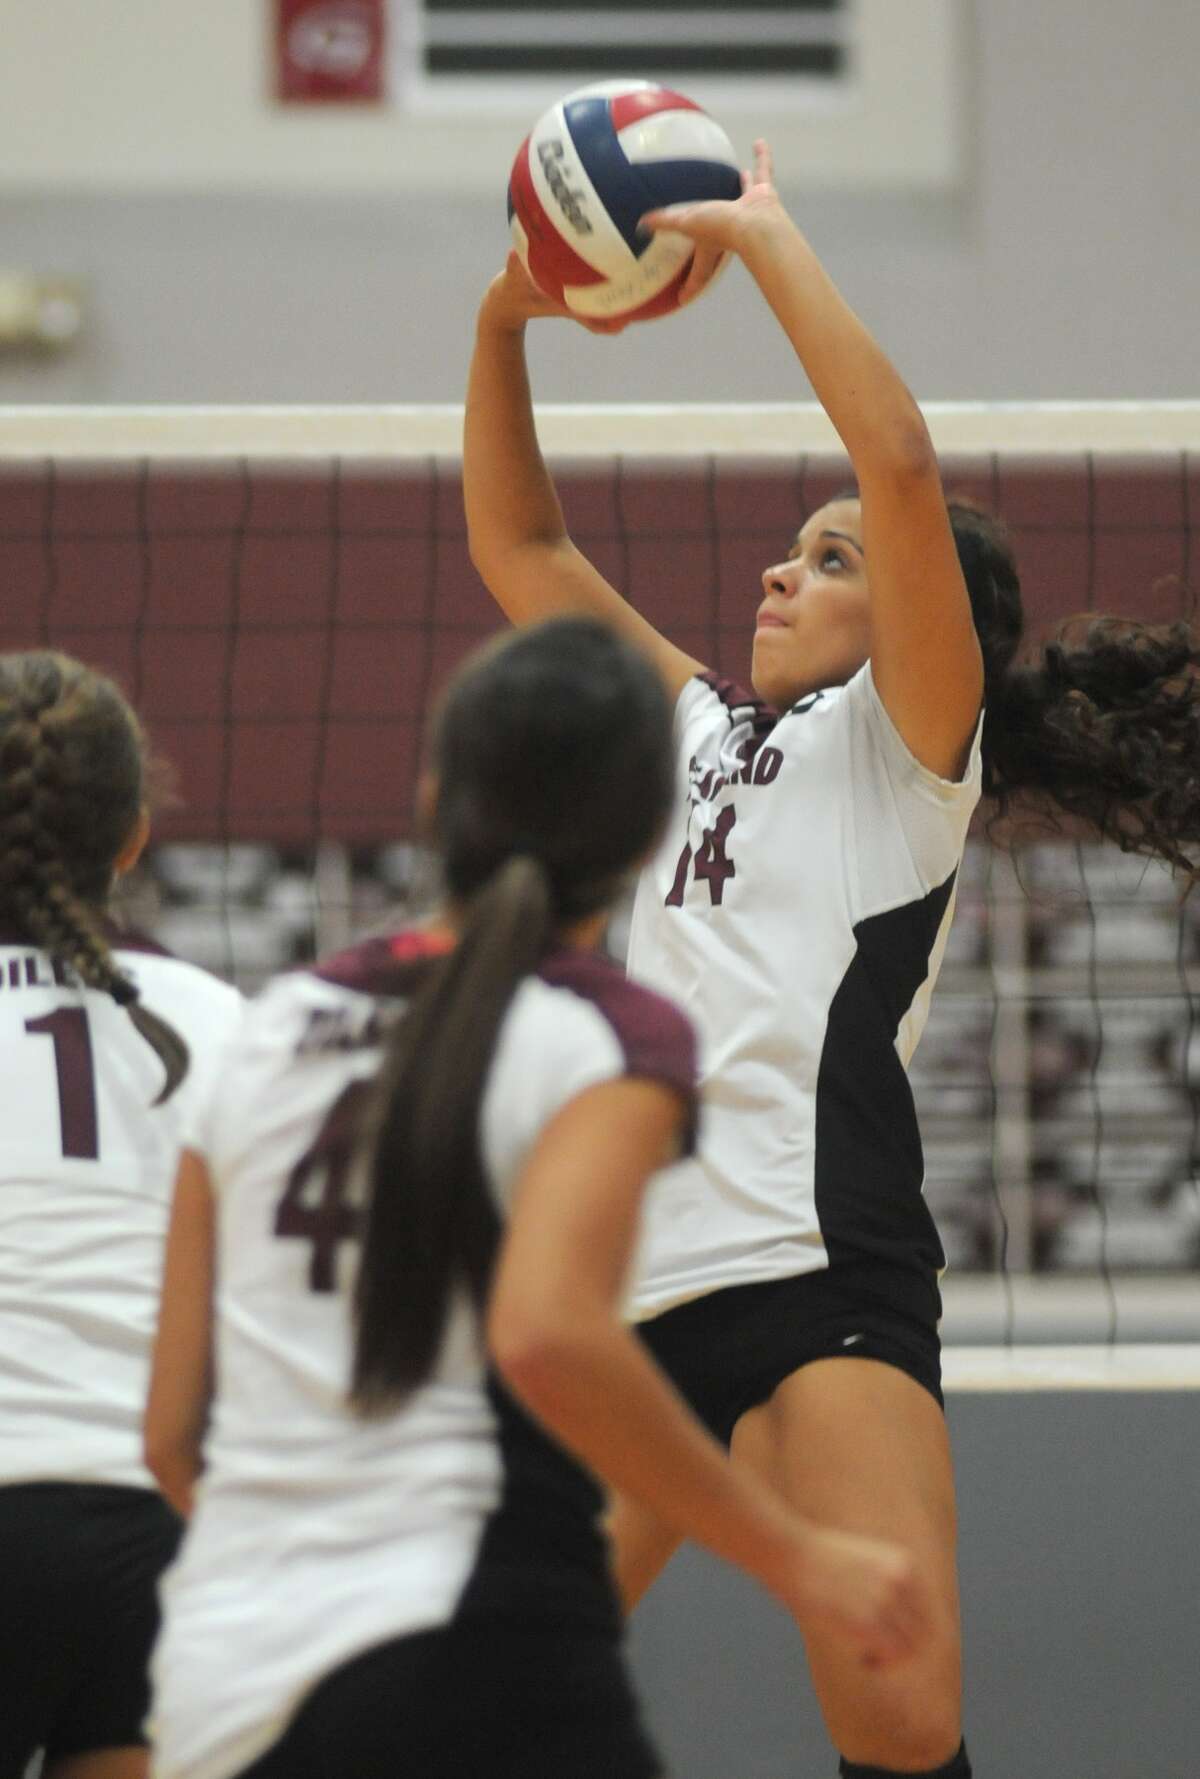 Volleyball Pearland's season off to solid start